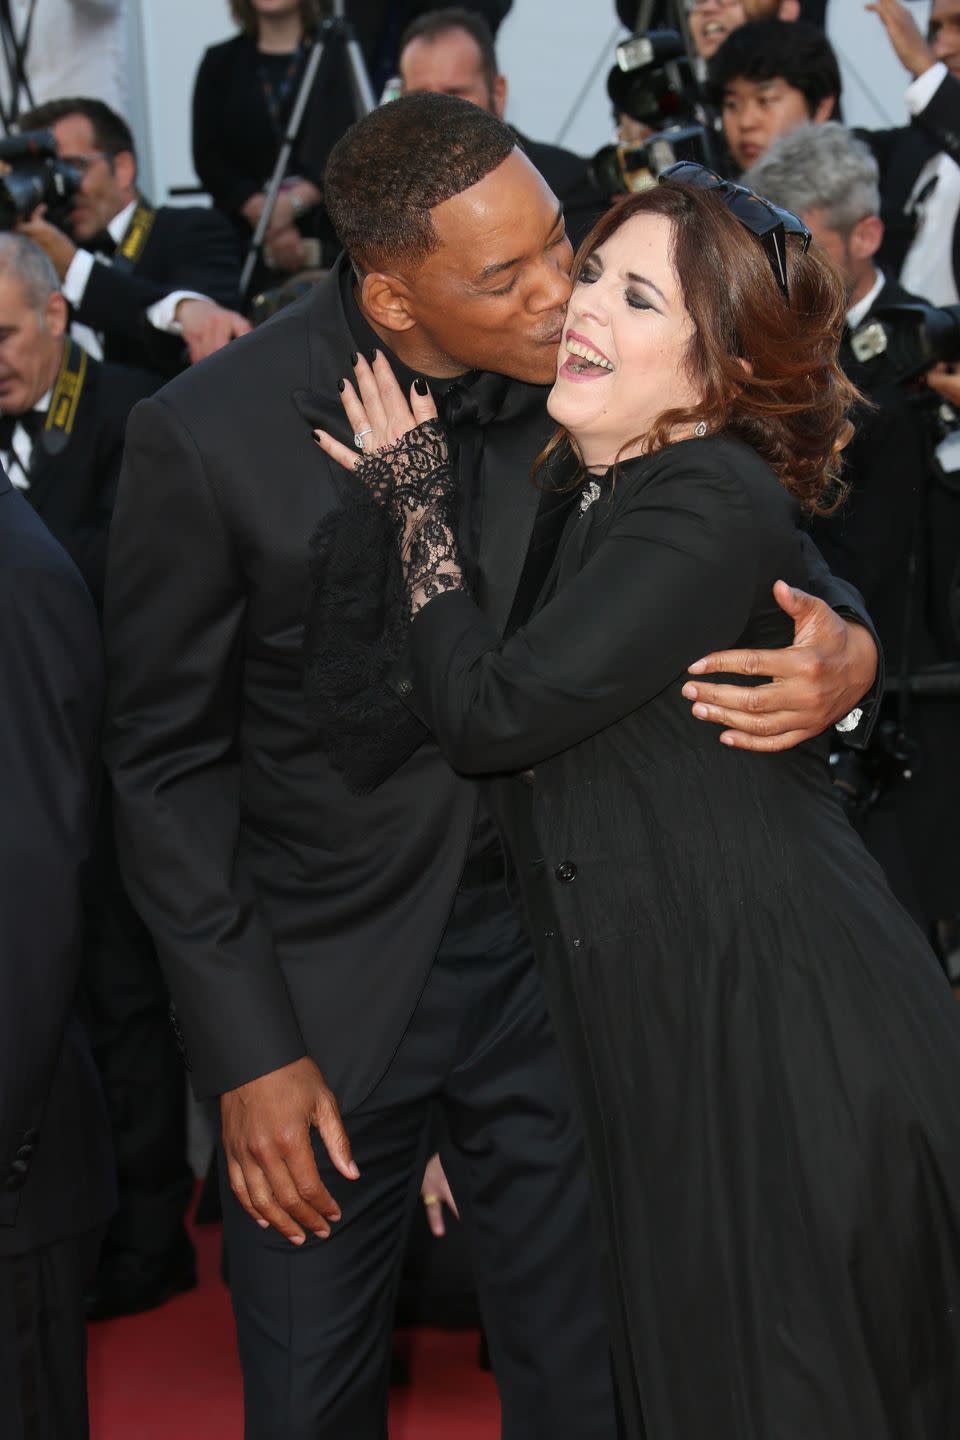 Most envy-inducing: Will Smith and Agnès Jaoui